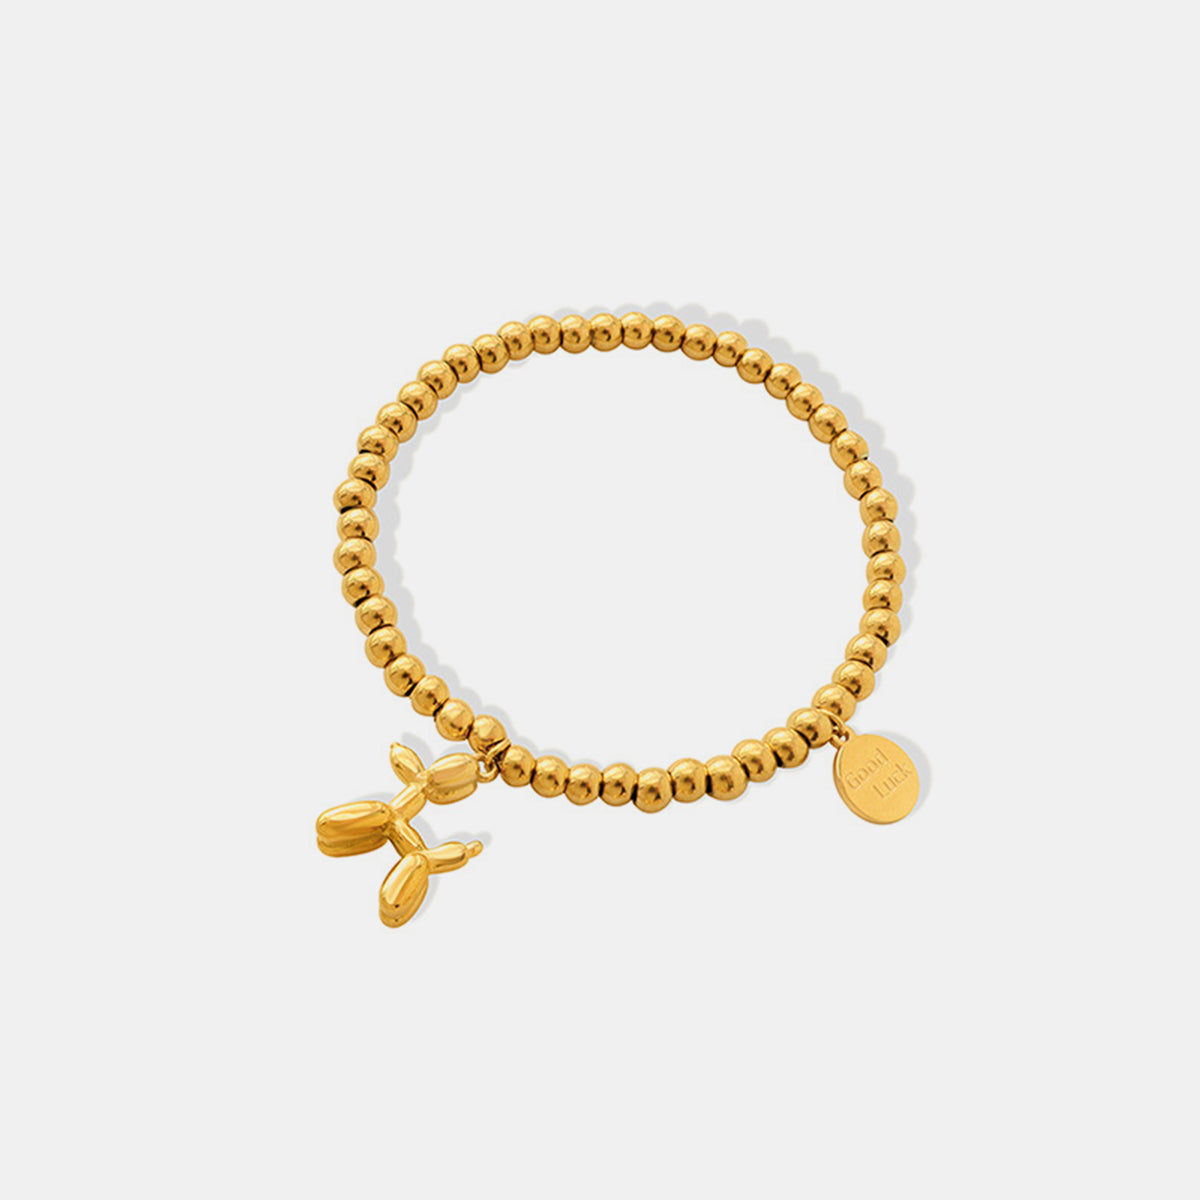 18K Gold-Plated Titanium Steel Puppy Shape Charm Bracelet - Tophatter Deals and Online Shopping - Electronics, Jewelry, Beauty, Health, Gadgets, Fashion - Tophatter's Discounts & Offers - tophatters - tophatters.co